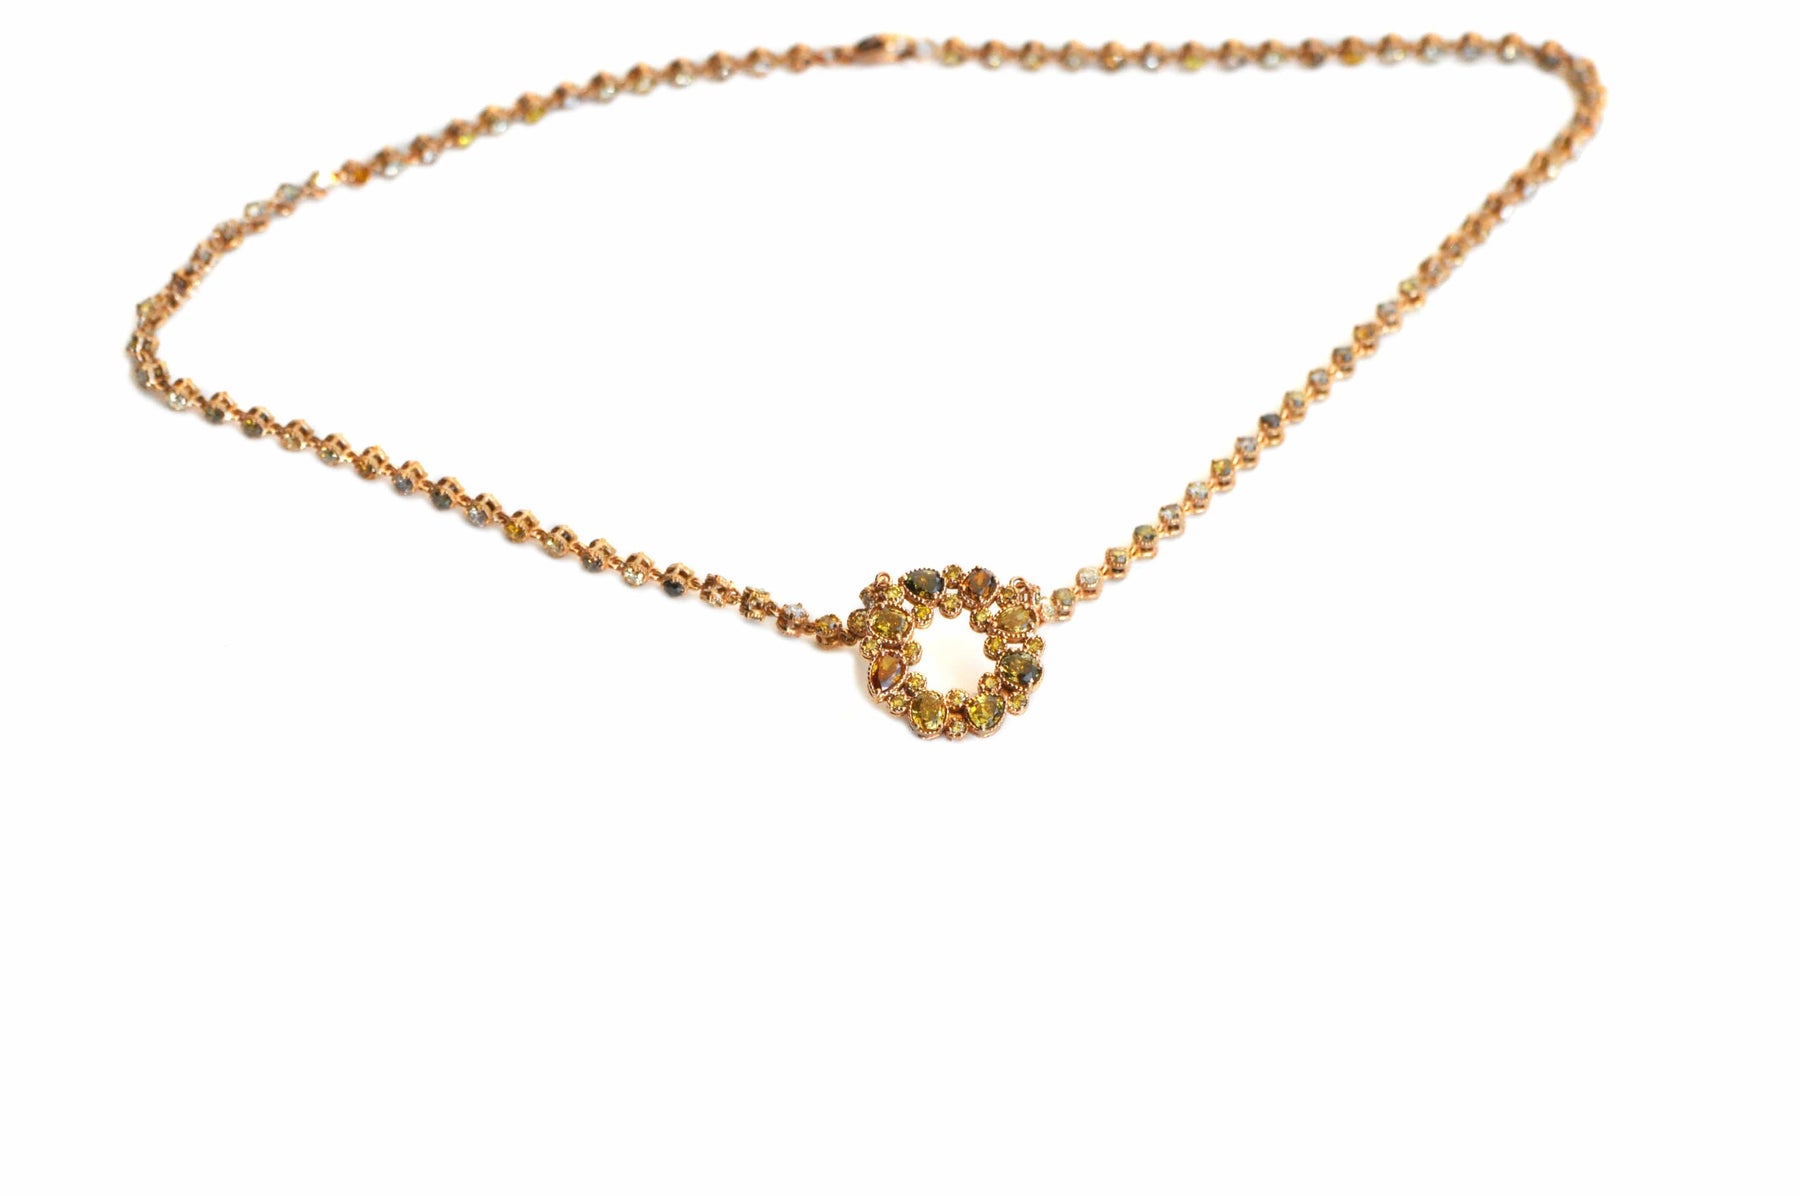 Chris Aire Medley Necklace - Chris Aire Fine Jewelry & Timepieces